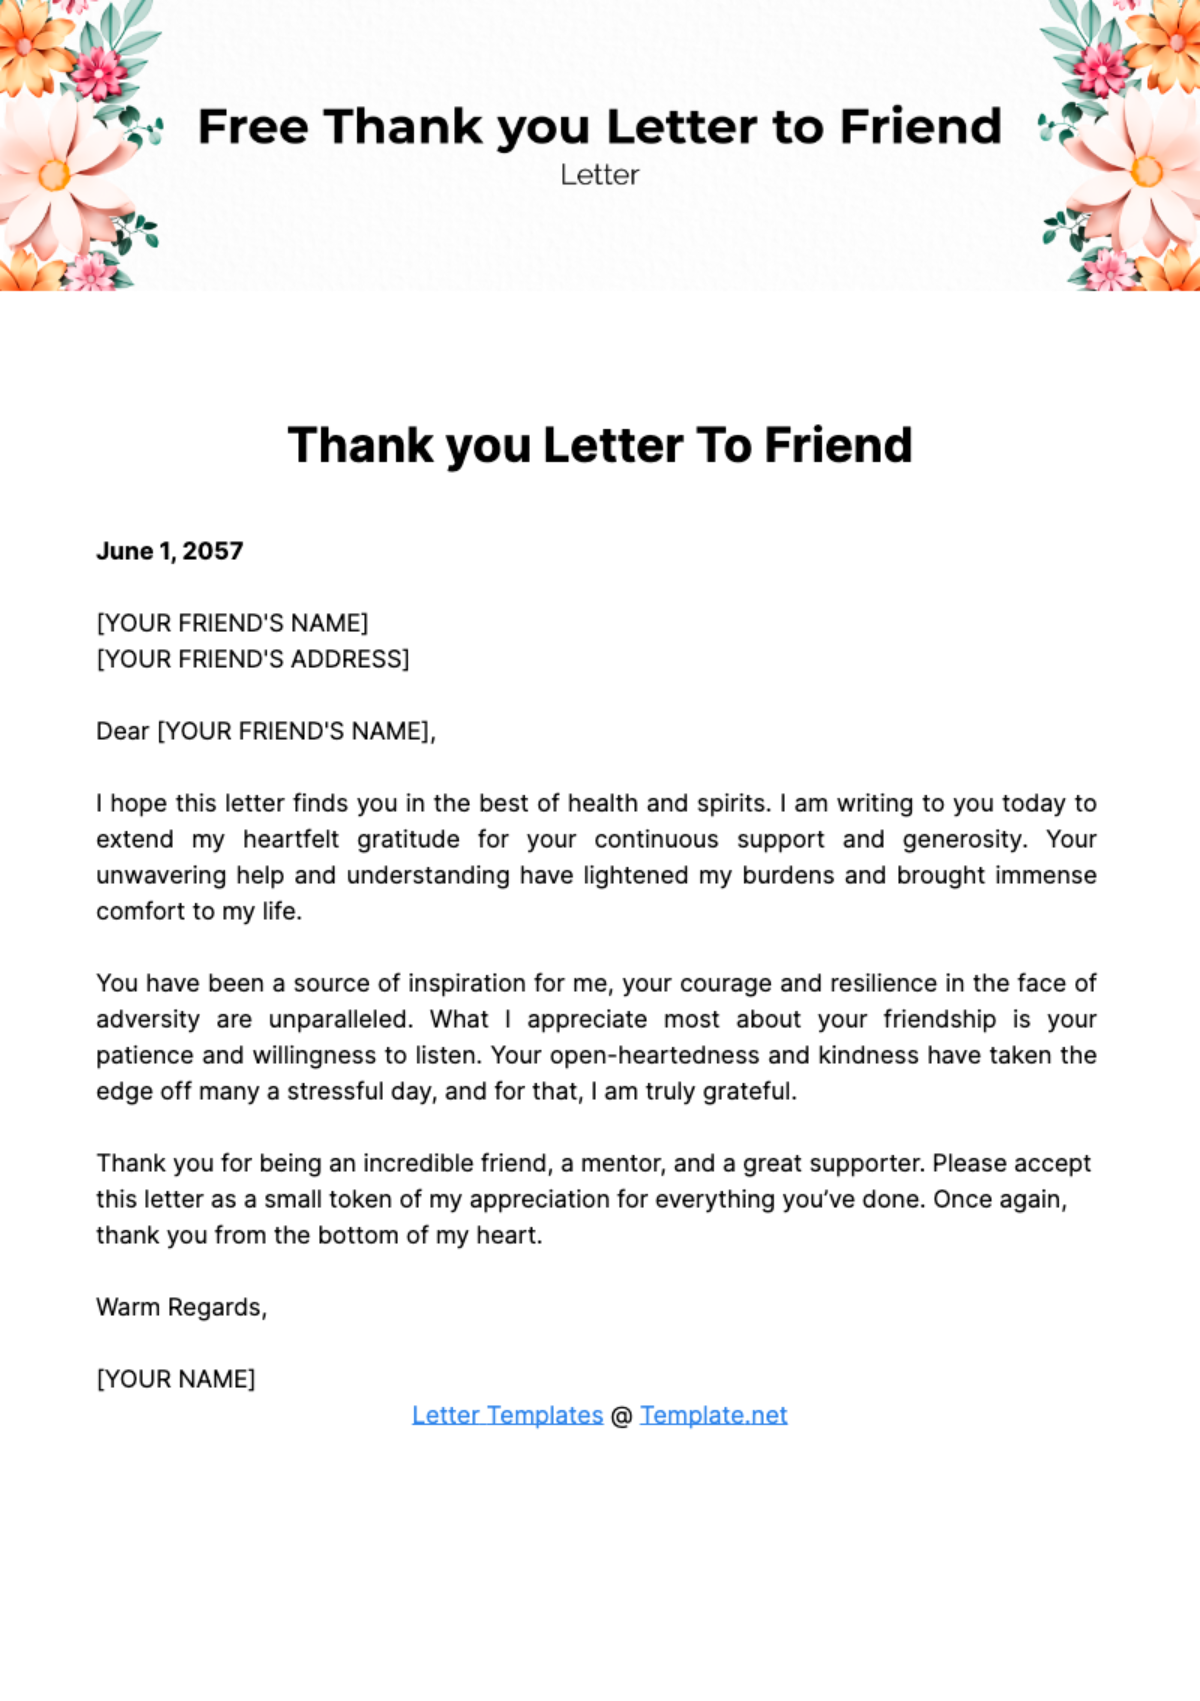 Free Thank you Letter to Friend Template